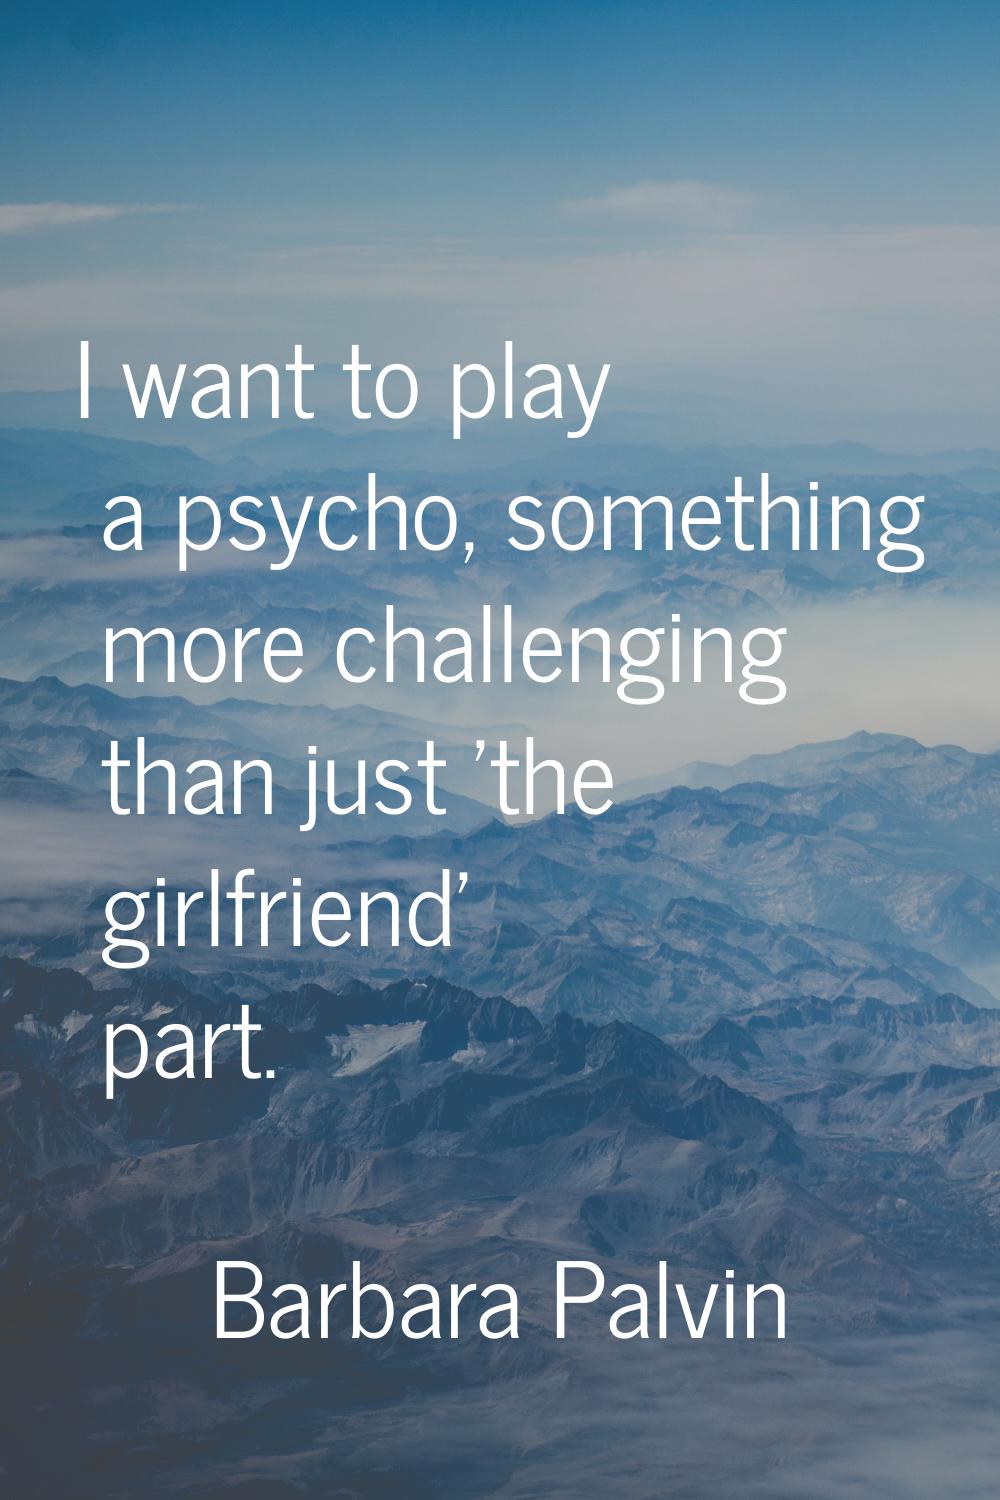 I want to play a psycho, something more challenging than just 'the girlfriend' part.